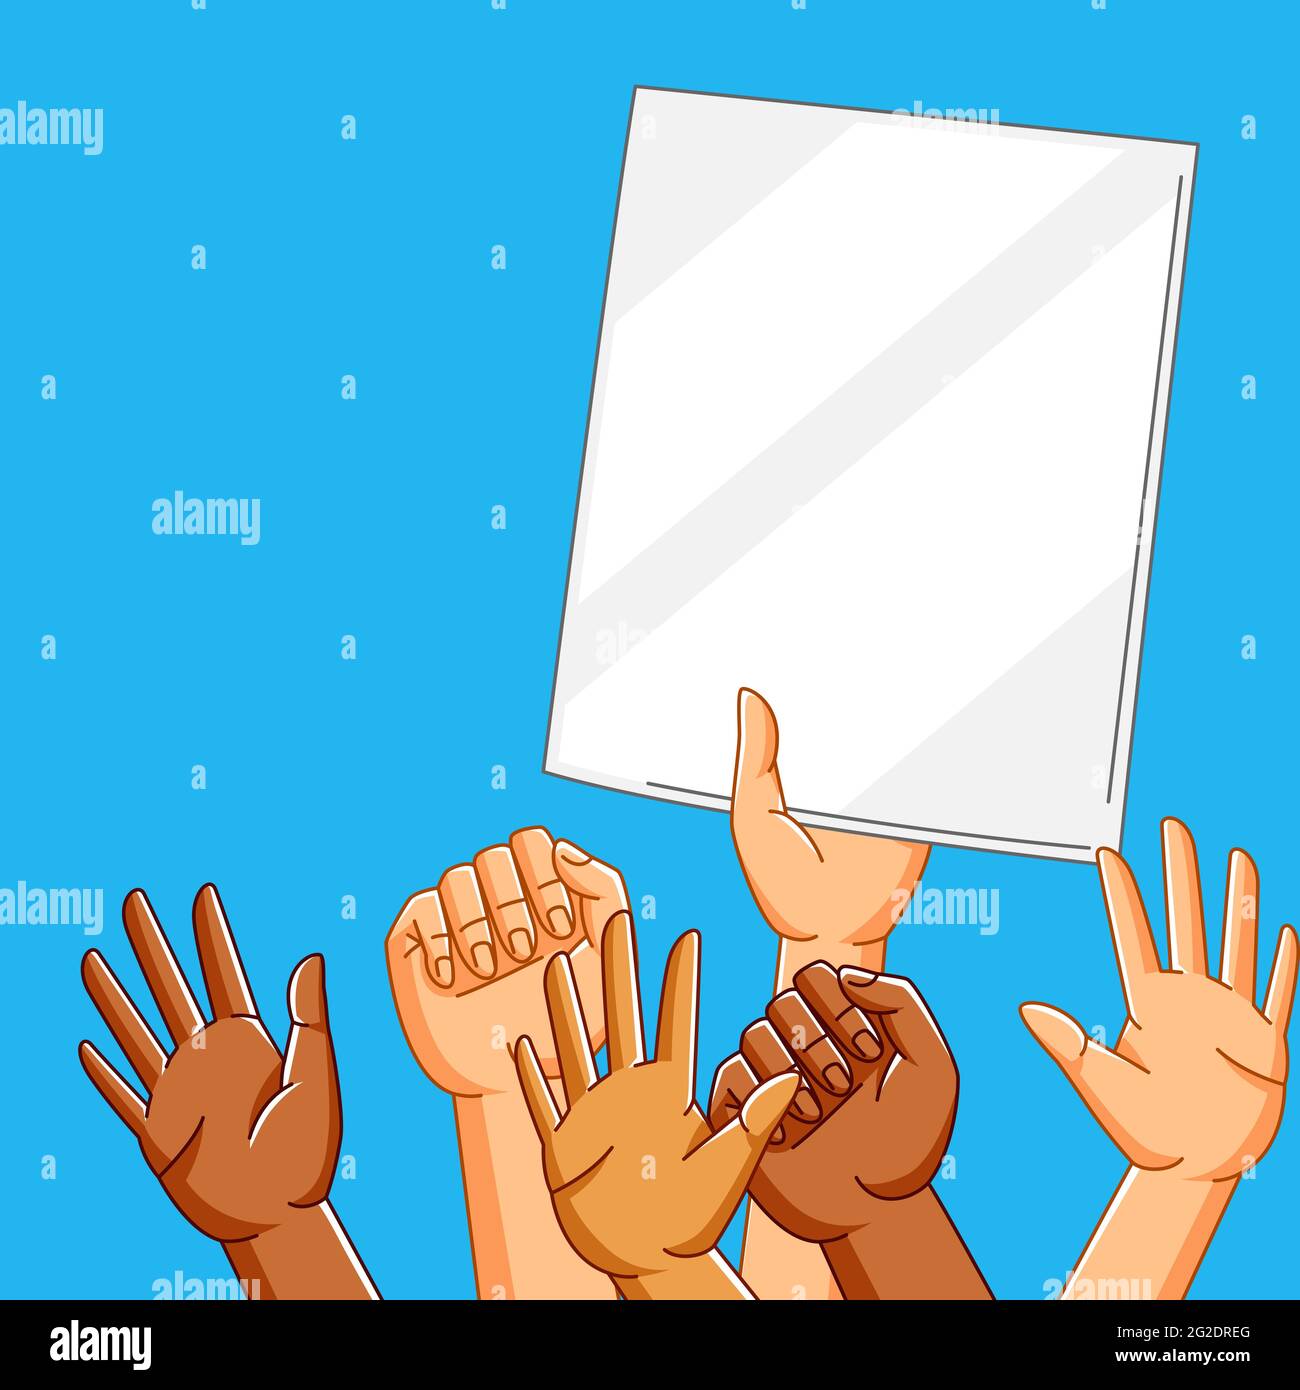 Illustration of people hands on demonstration or protest. Stock Vector